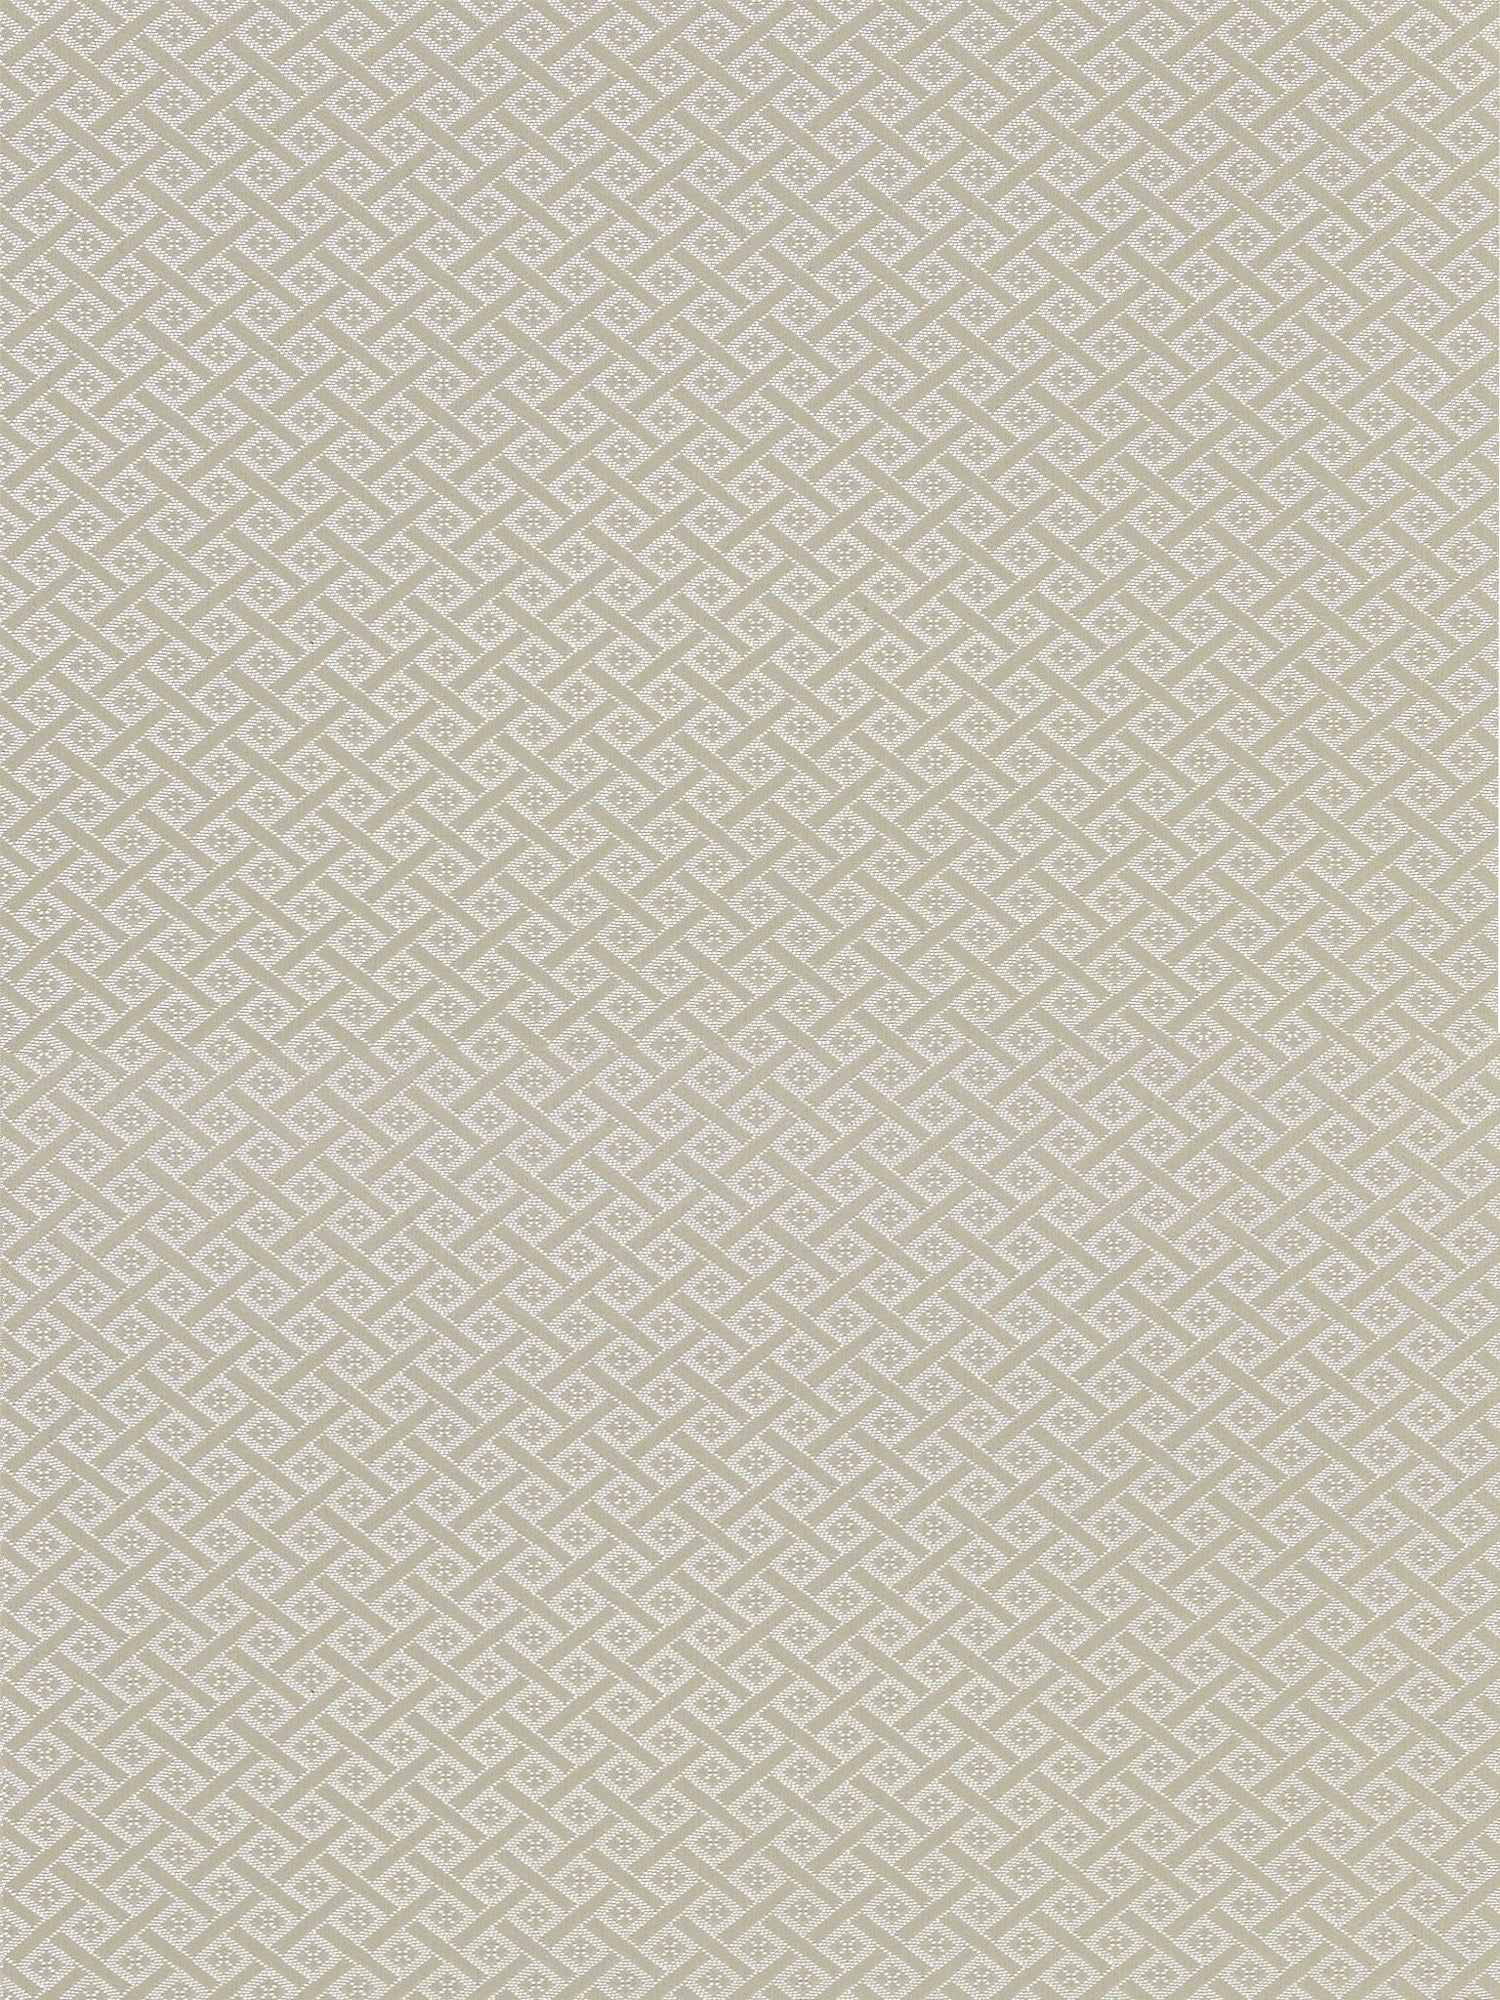 Diamante Matelasse fabric in fawn color - pattern number SC 000127223 - by Scalamandre in the Scalamandre Fabrics Book 1 collection